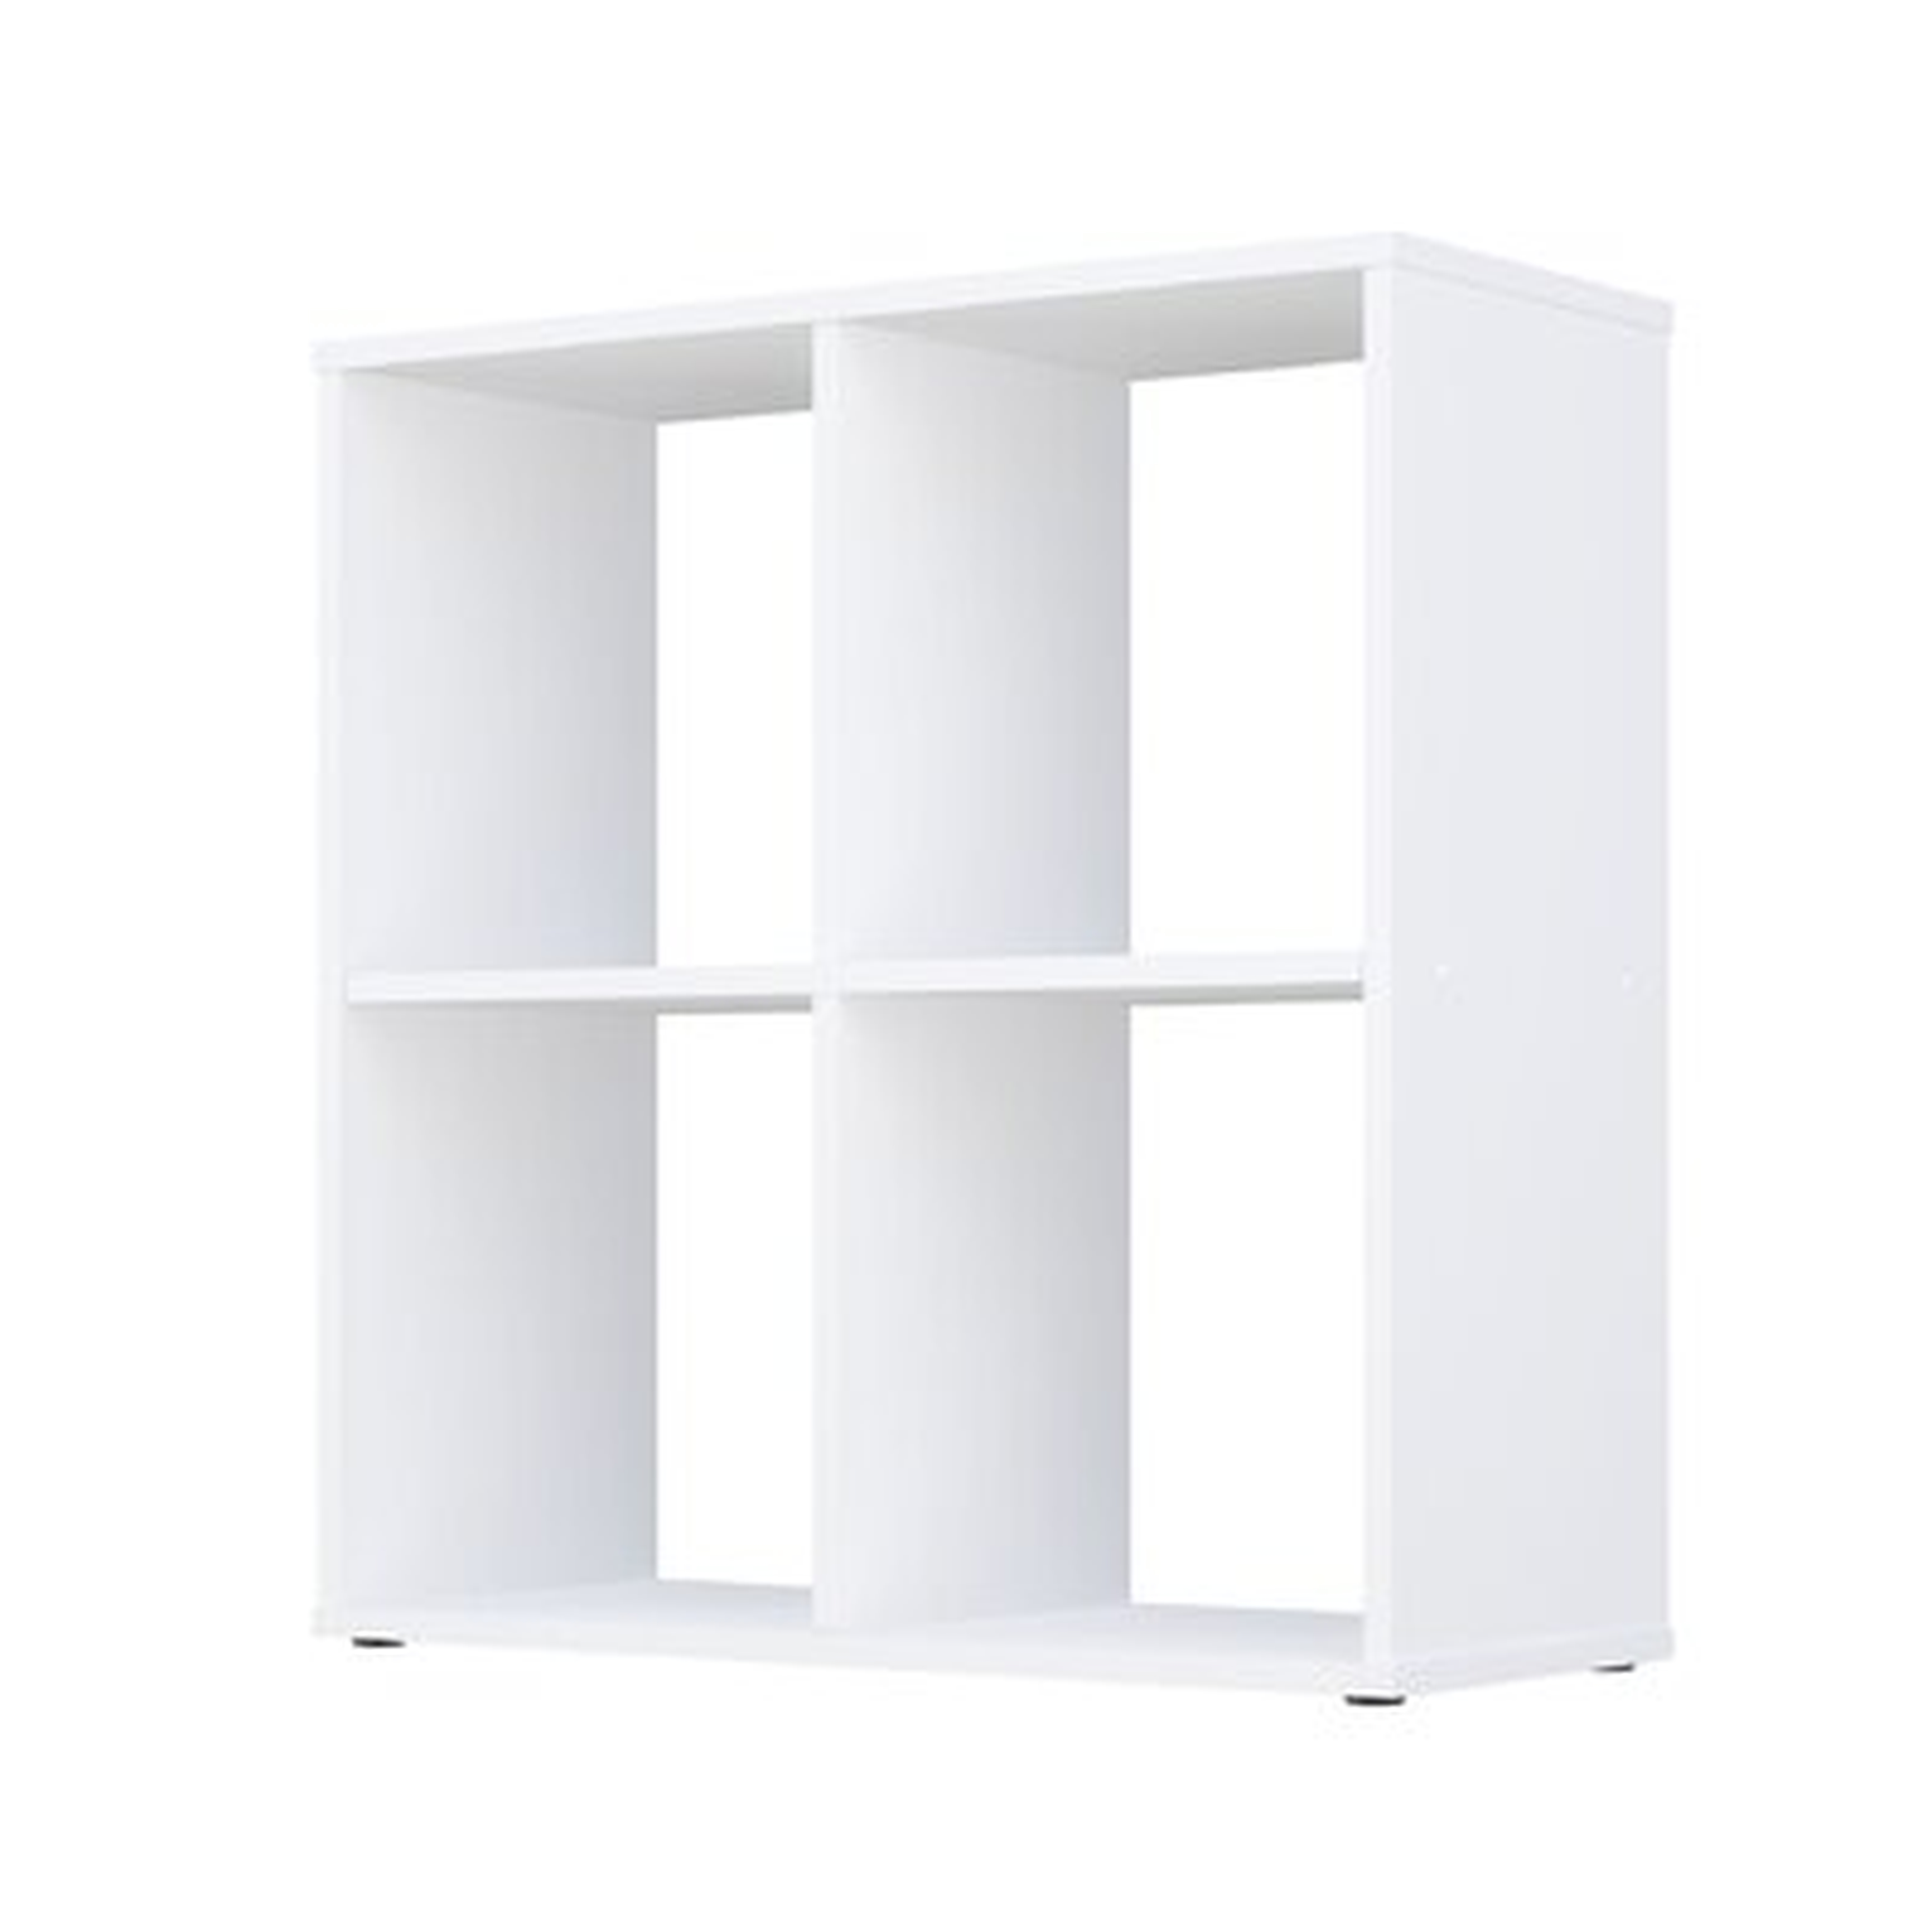 4 Cube Storage Bookcase Units Organizer With 2 Shelves For Bedroom, Living Room Or Office - Wayfair